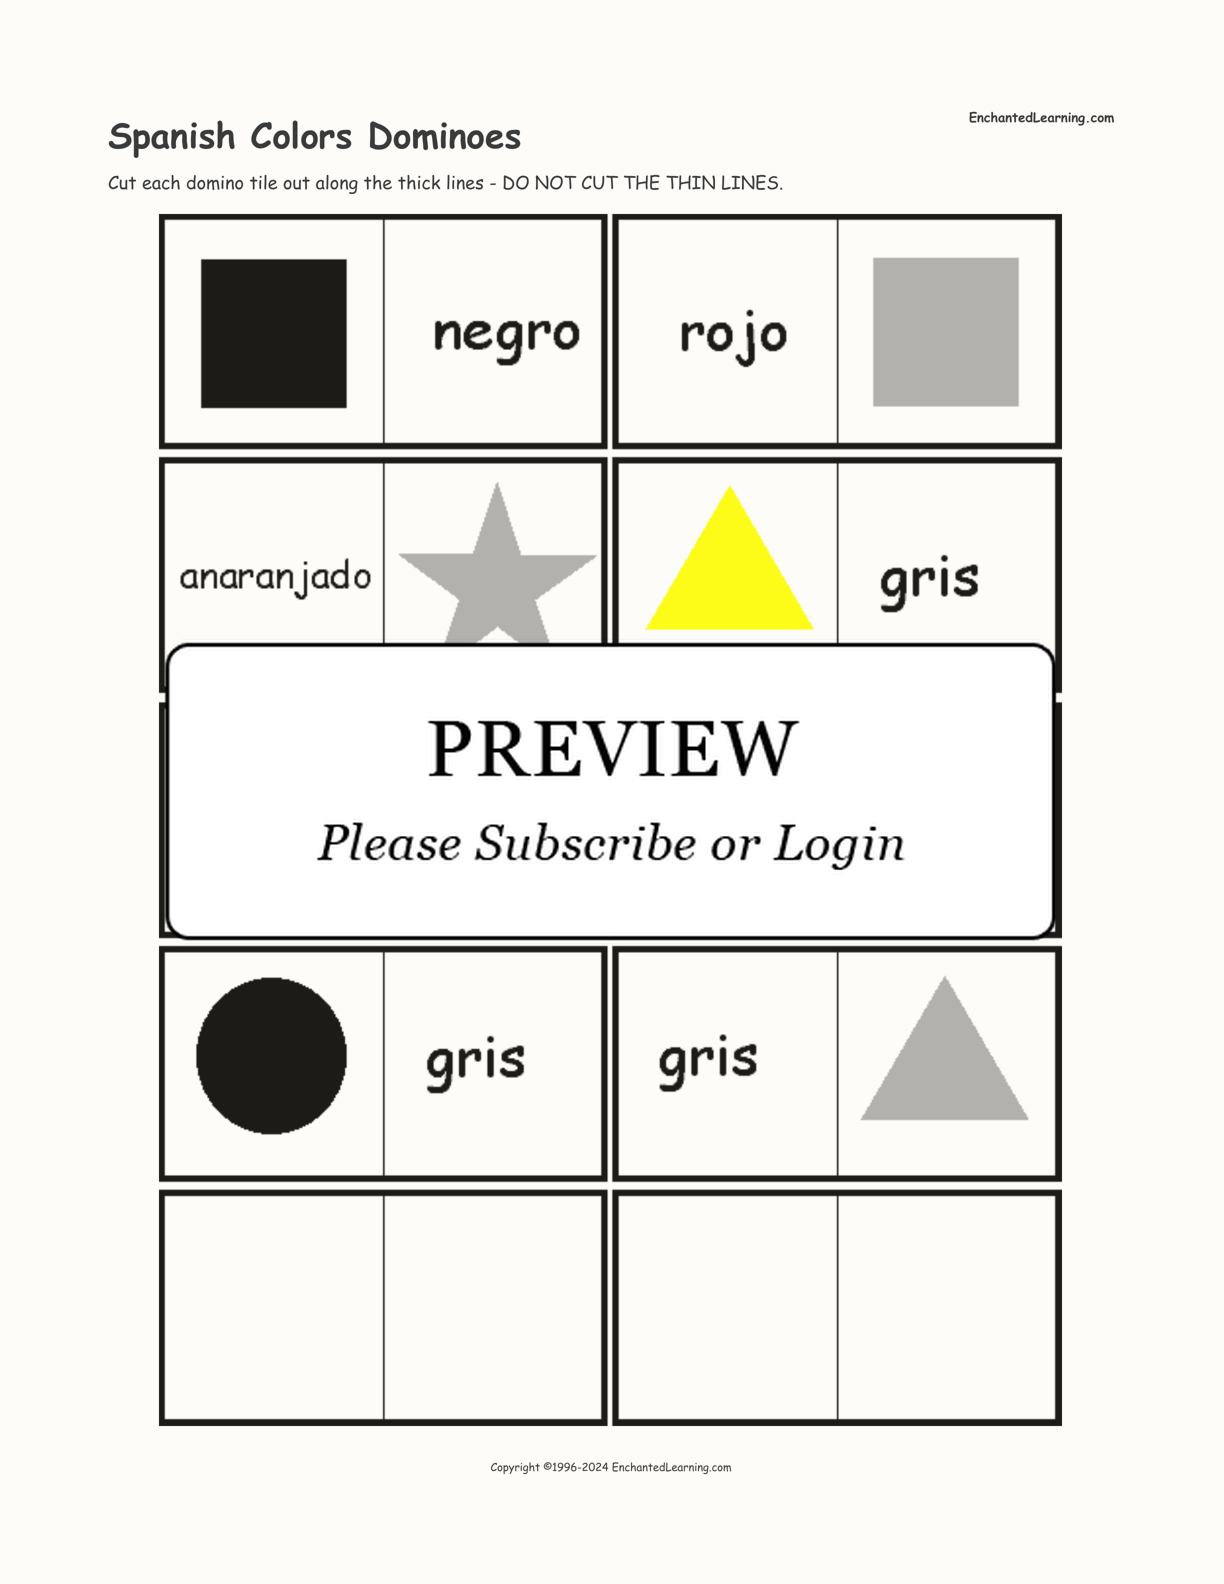 Spanish Colors Dominoes interactive printout page 1